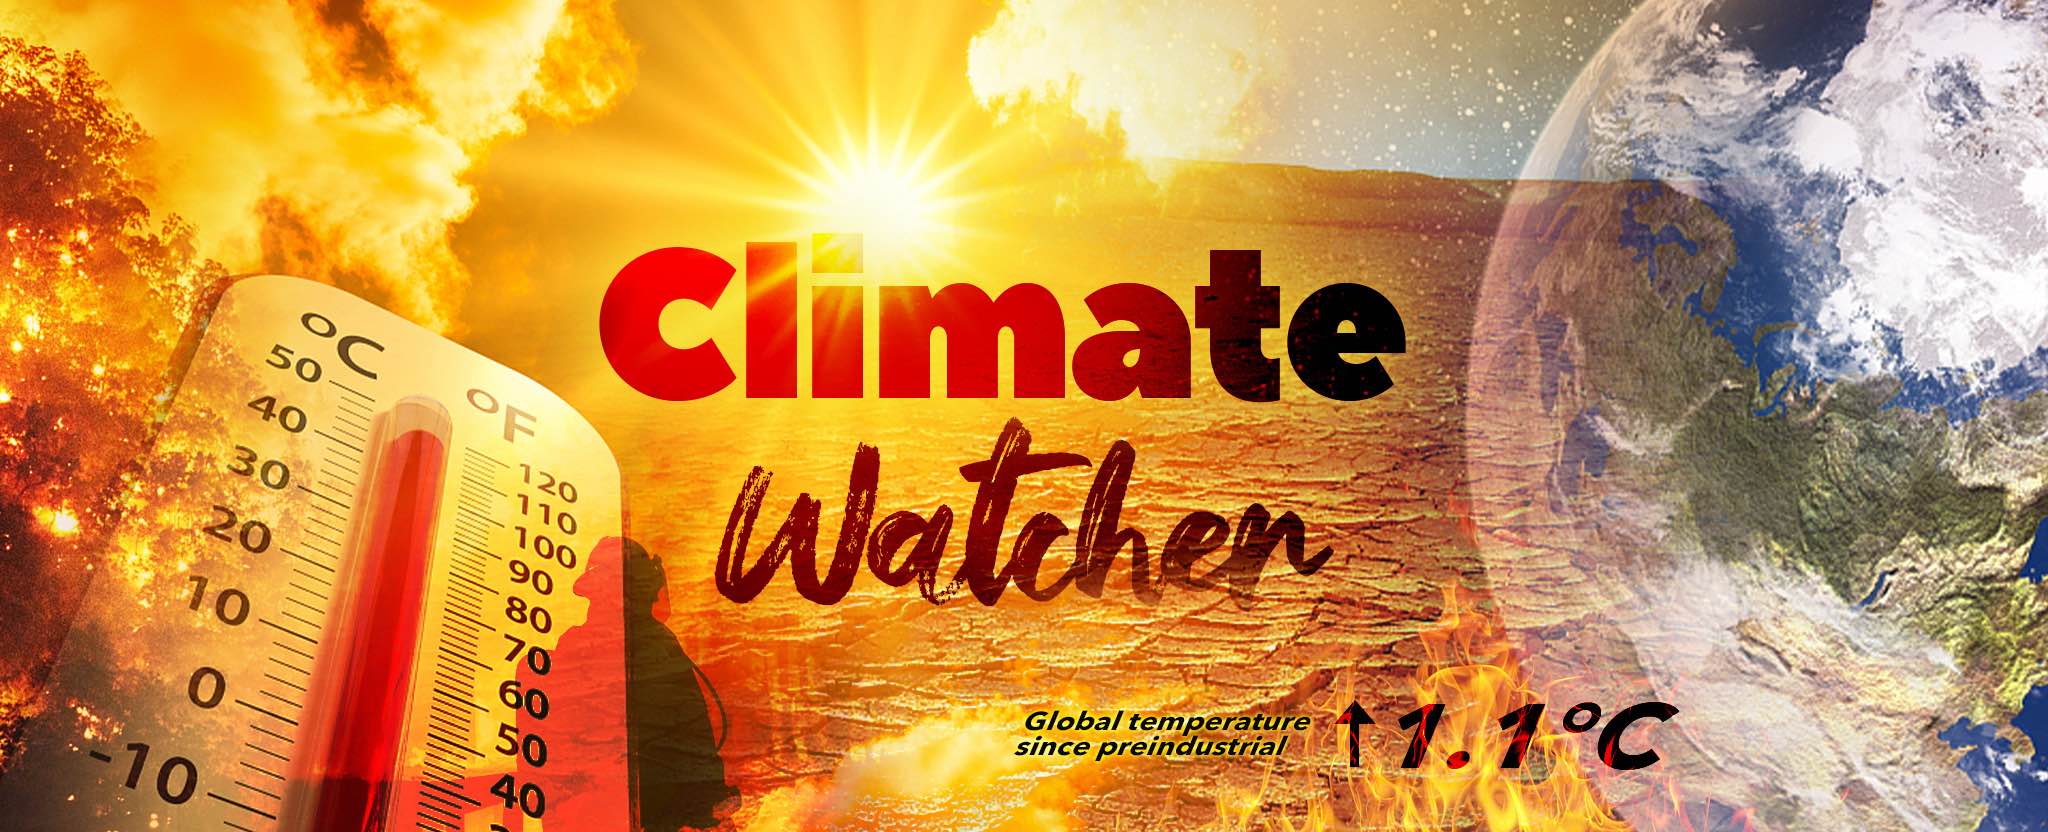 climate watcher 